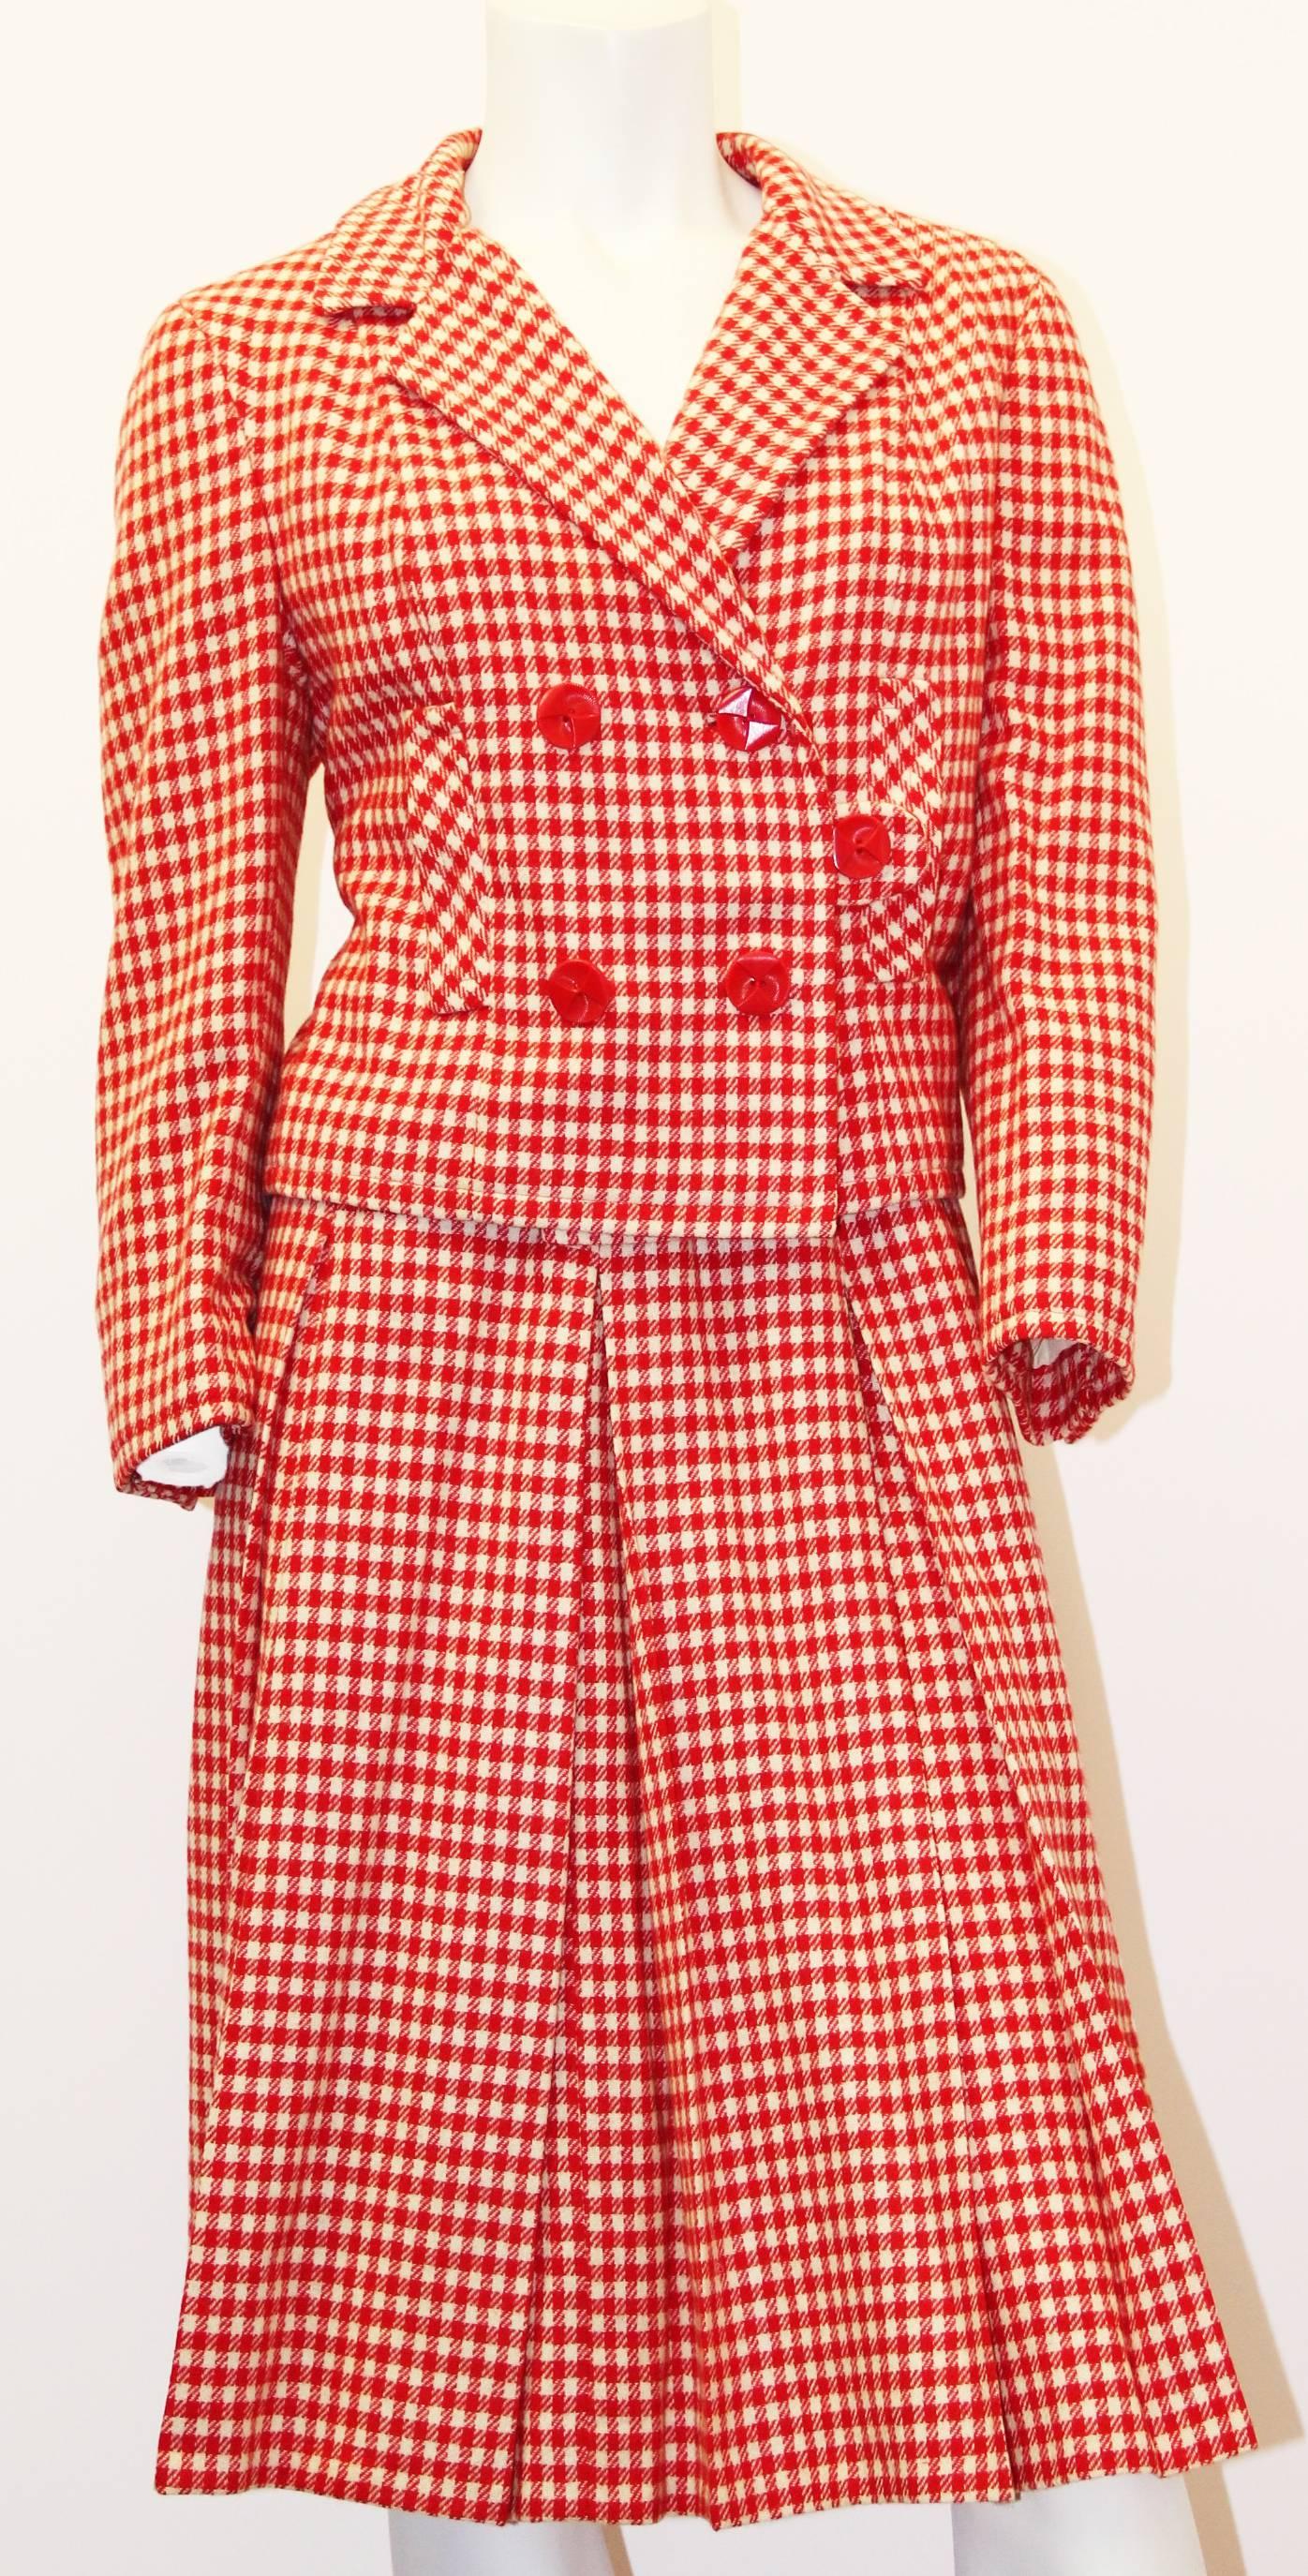 60s red and cream checkered wool I.MAGNIN & Co. double breasted skirt suit. Fully lined jacket features mock double breast detail and faux front pockets. Box pleated skirt (unlined) zips up the left side. Button detail on each sleeve. 

